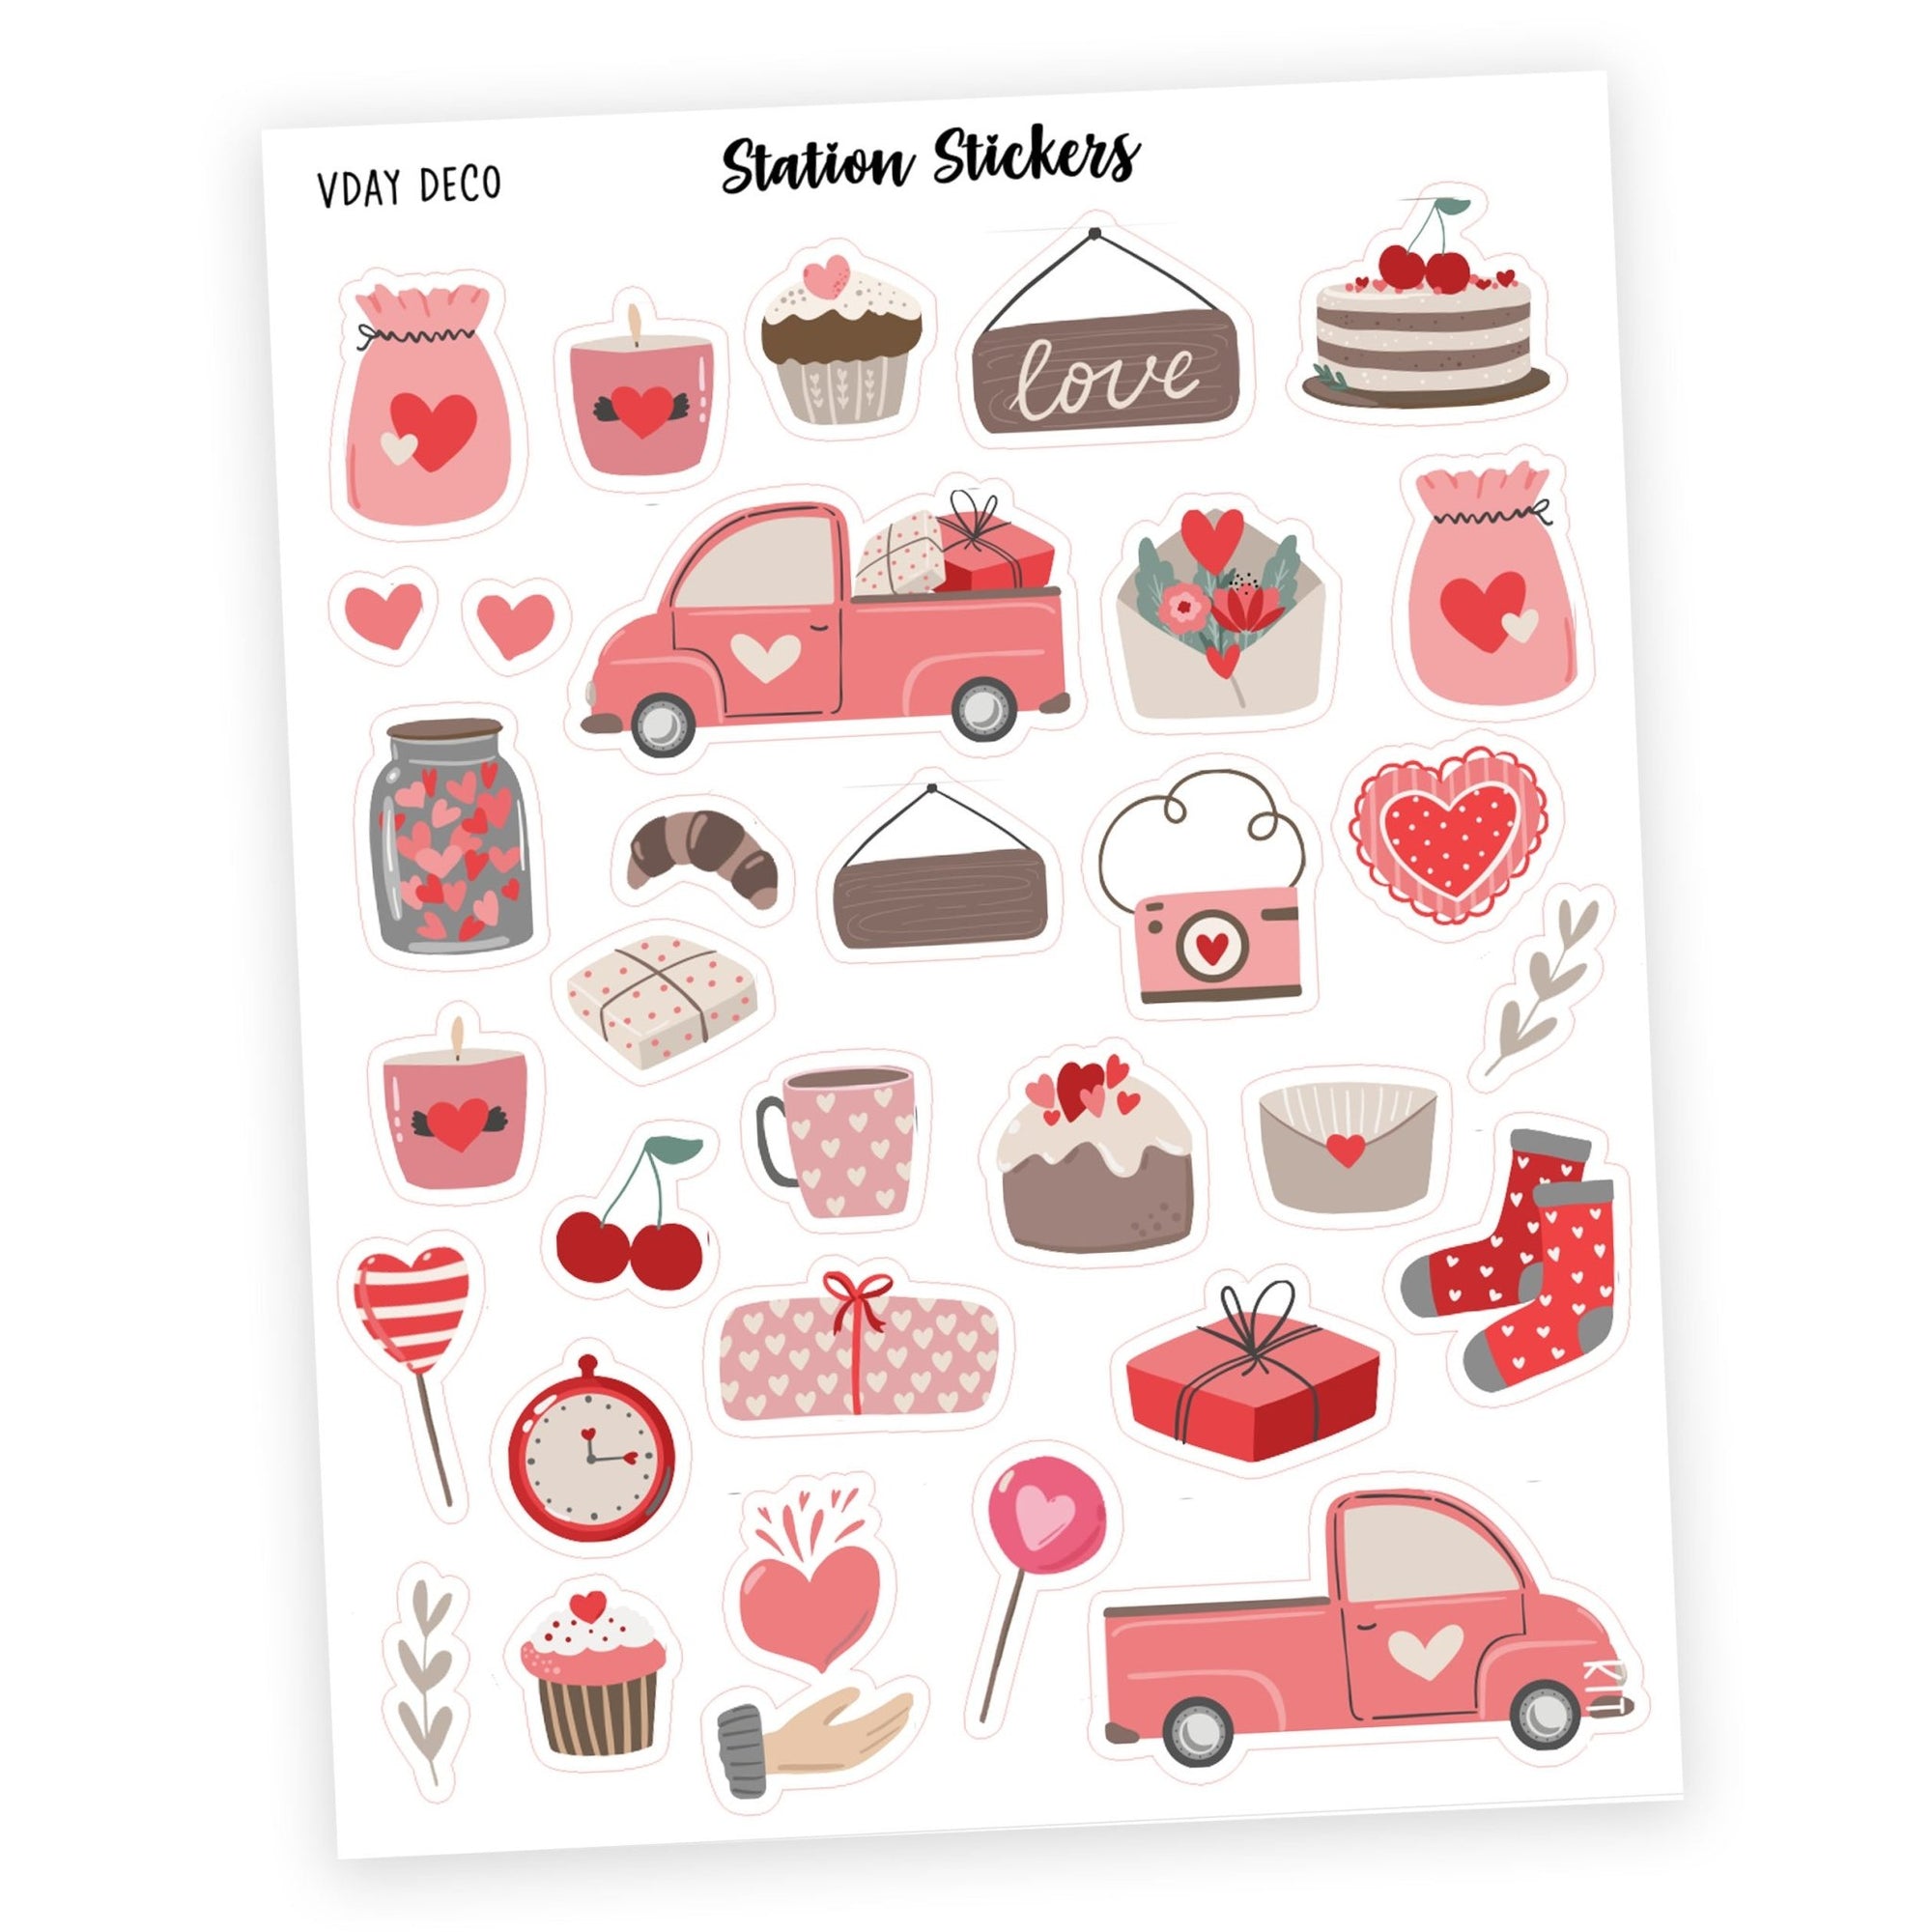 VDAY DECO - Station Stickers